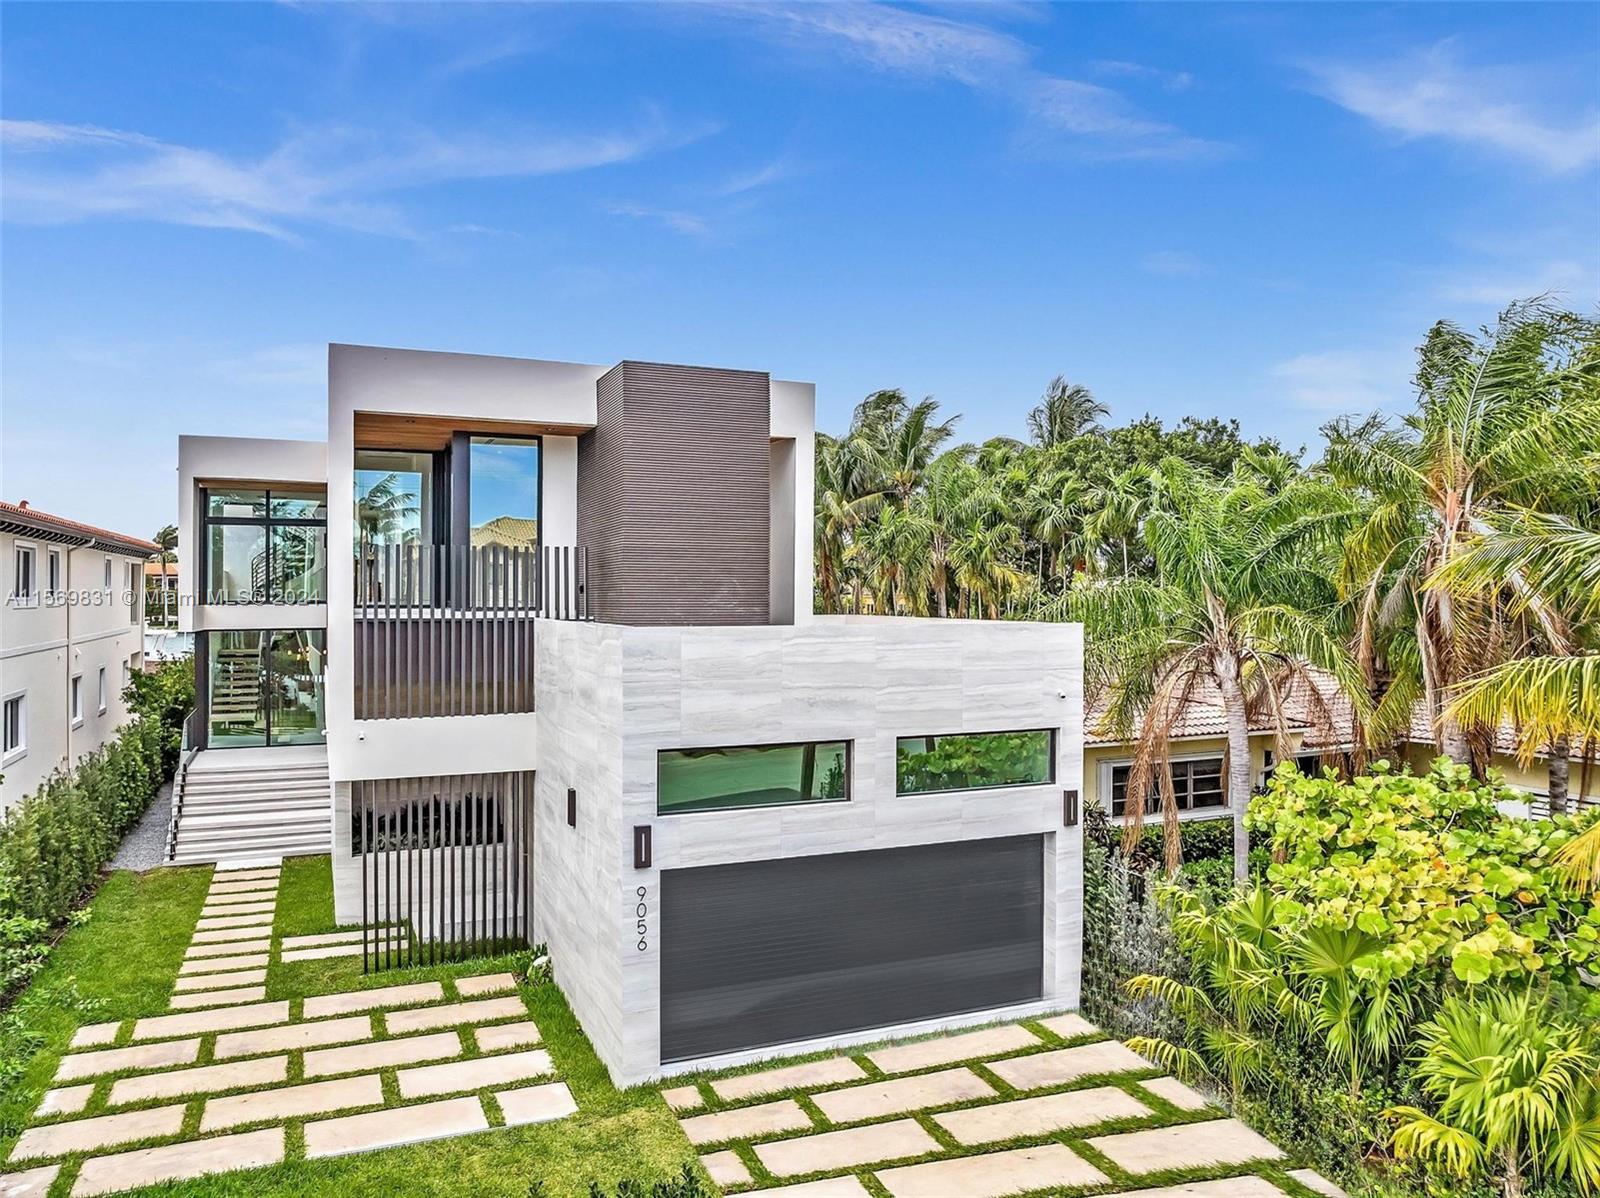 This newly built mansion offers an impressive 6,565 SF of space, boasting 7 bedrooms, 7.5 bathrooms,